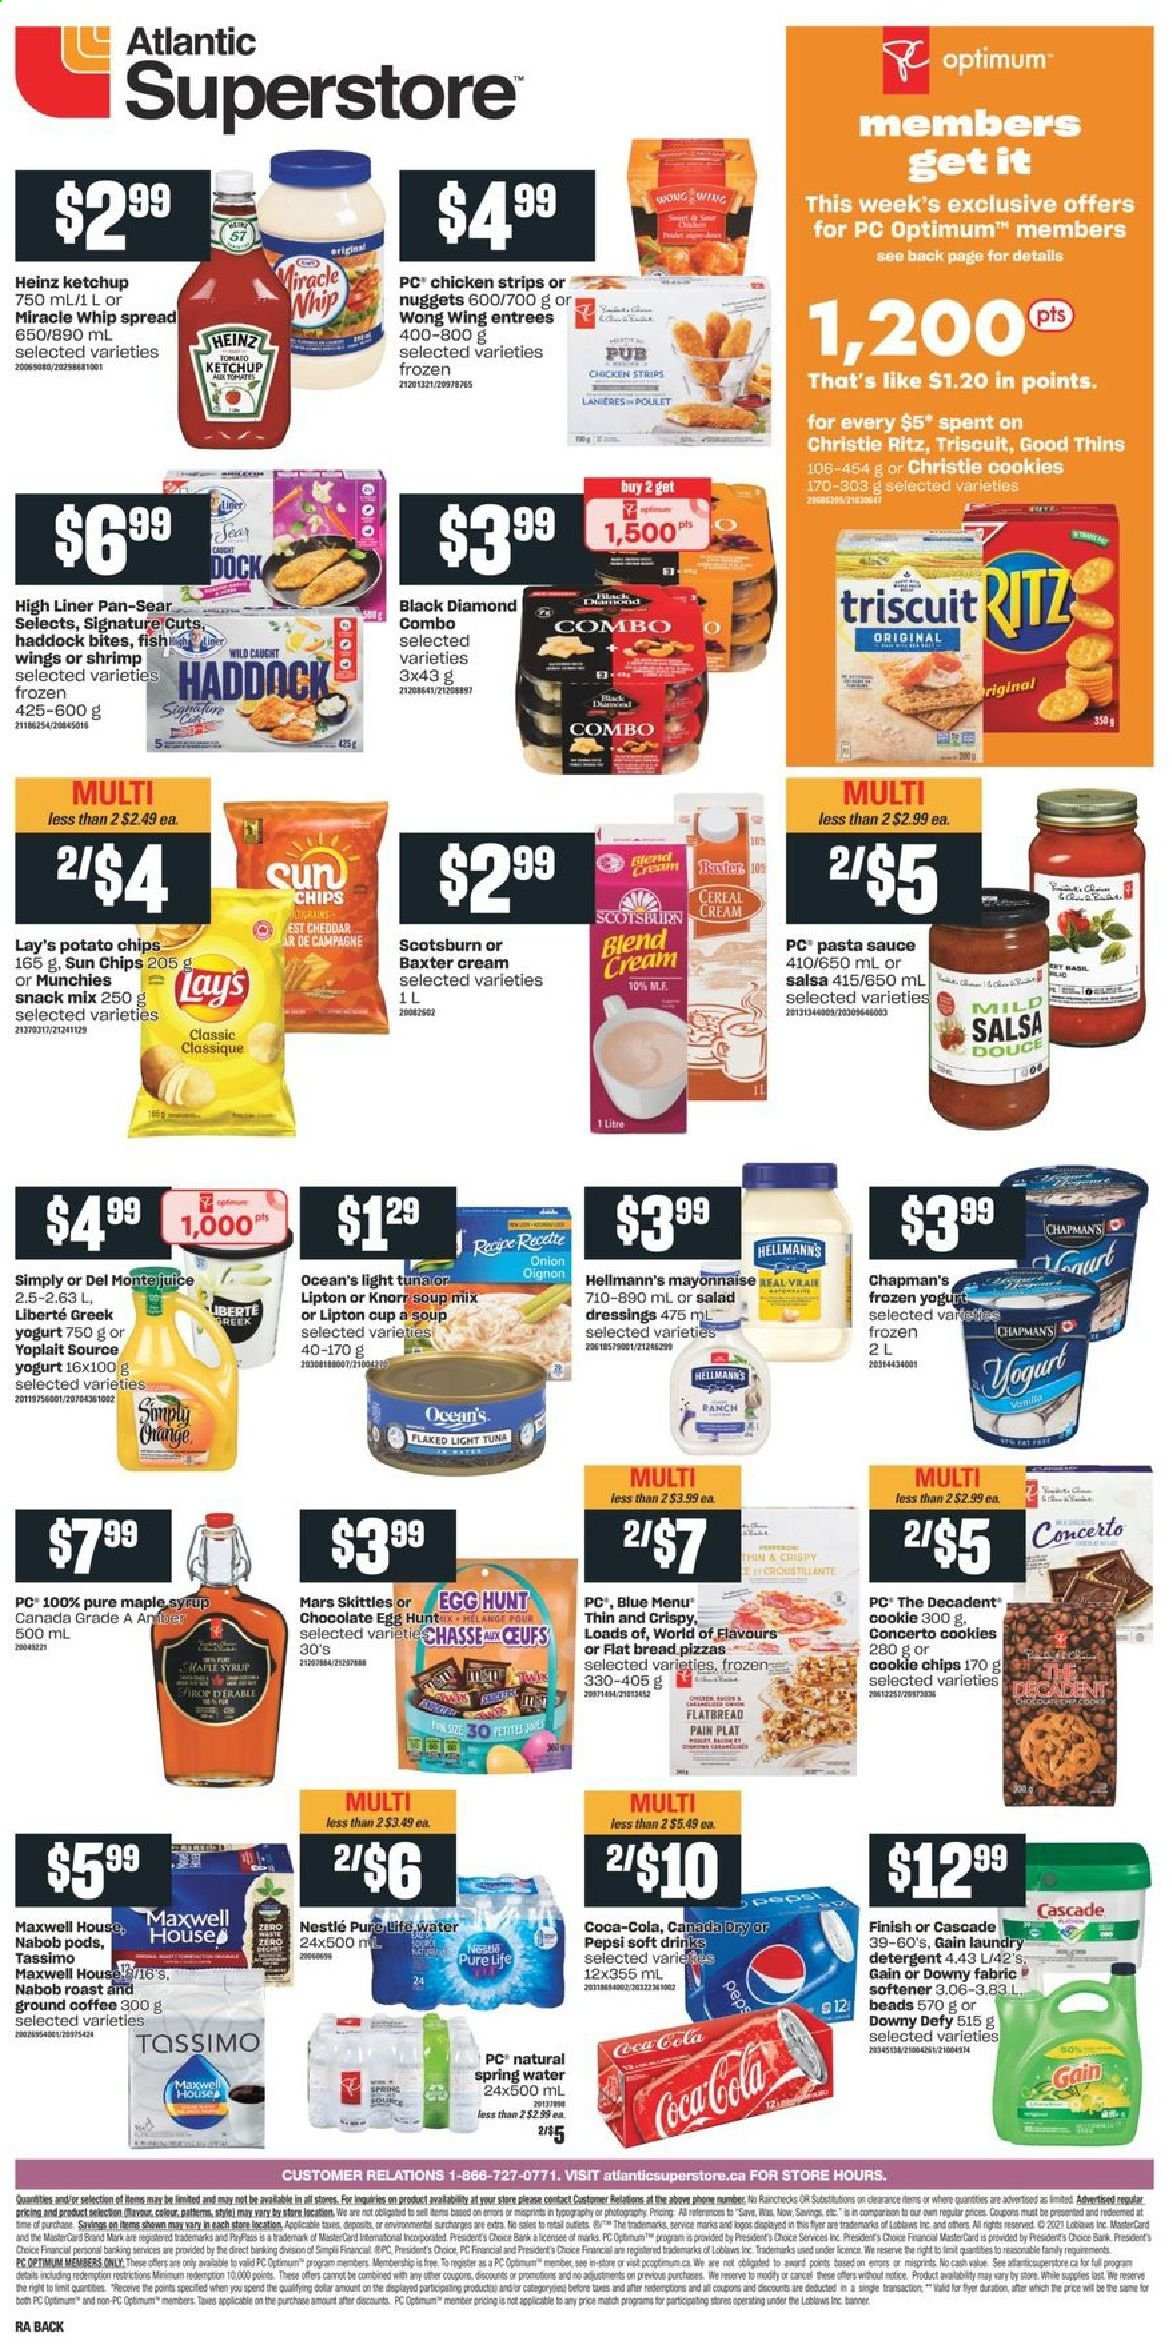 thumbnail - Atlantic Superstore Flyer - March 25, 2021 - March 31, 2021 - Sales products - bread, flatbread, tuna, haddock, shrimps, pizza, pasta sauce, soup mix, soup, nuggets, sauce, cheese, Président, yoghurt, Yoplait, eggs, mayonnaise, Miracle Whip, Hellmann’s, strips, chicken strips, cookies, chocolate, snack, Mars, Skittles, RITZ, potato chips, Lay’s, Thins, Heinz, light tuna, cereals, salsa, maple syrup, syrup, Canada Dry, Coca-Cola, Pepsi, soft drink, spring water, Pure Life Water, Maxwell House, coffee, ground coffee, L'Or, Gain, fabric softener, laundry detergent, Cascade, Downy Laundry, Optimum, Knorr, Nestlé. Page 2.